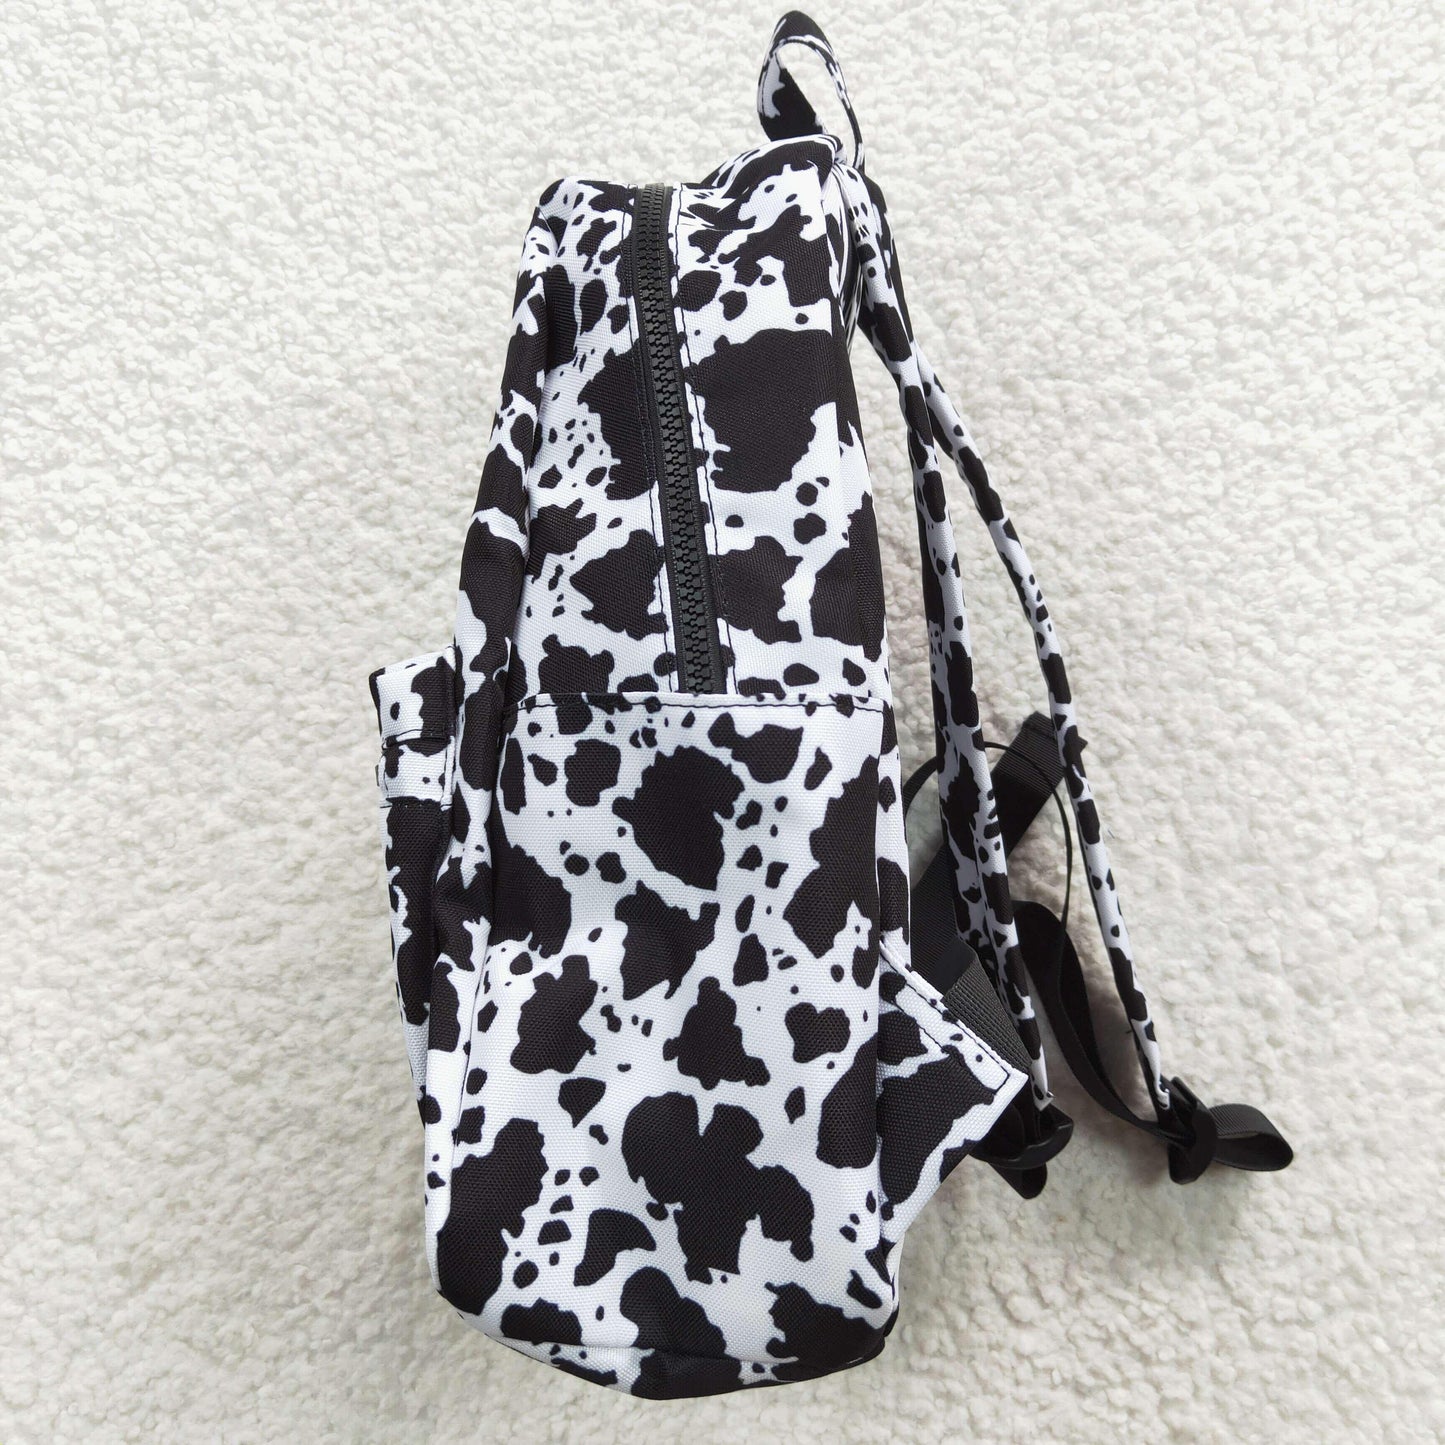 PREORDER - Black And White Cow Backpack